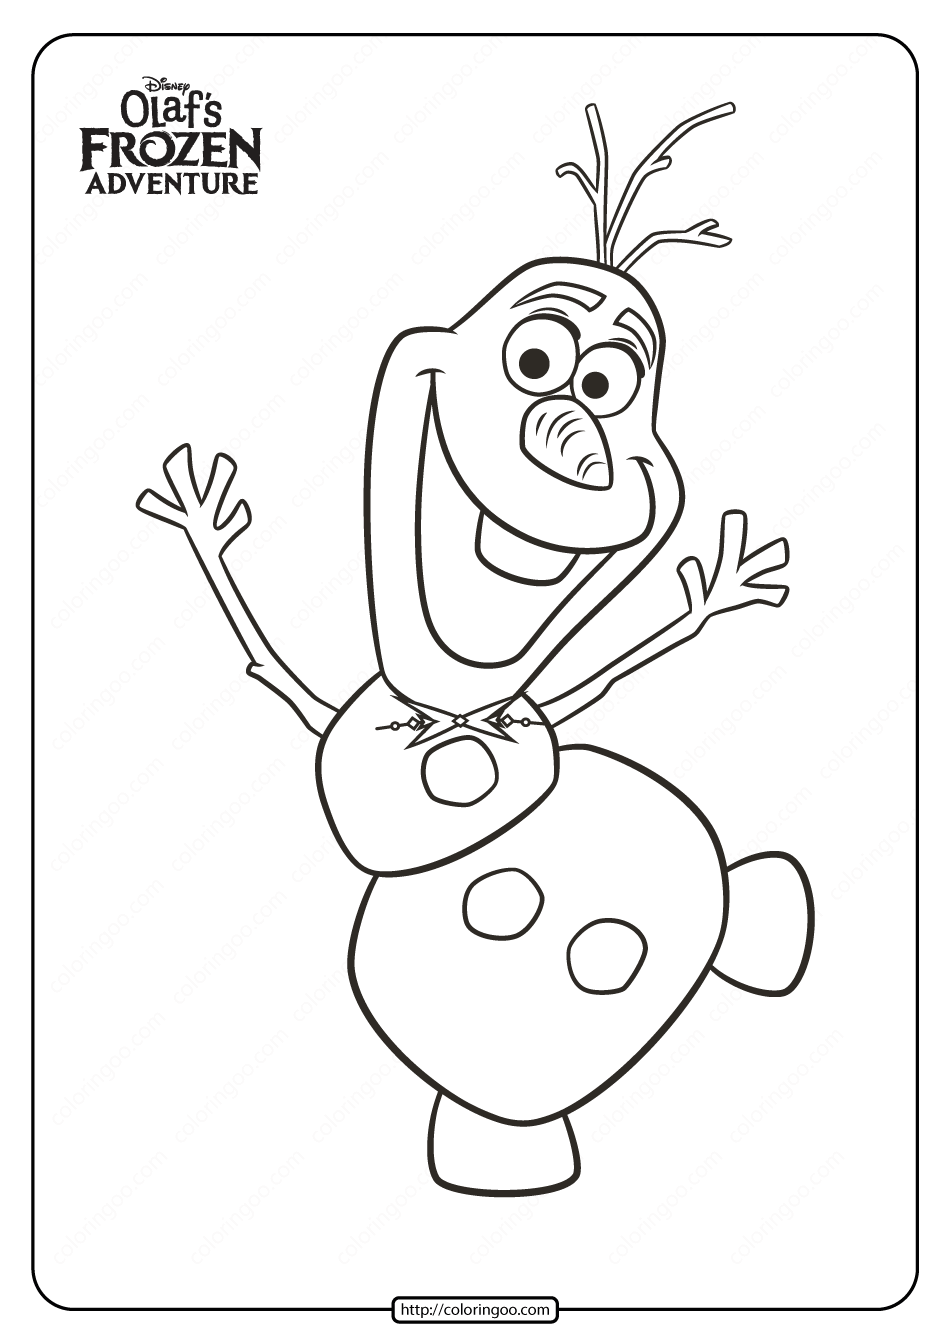 Disney Olaf’s Frozen Adventure Coloring Pages 03